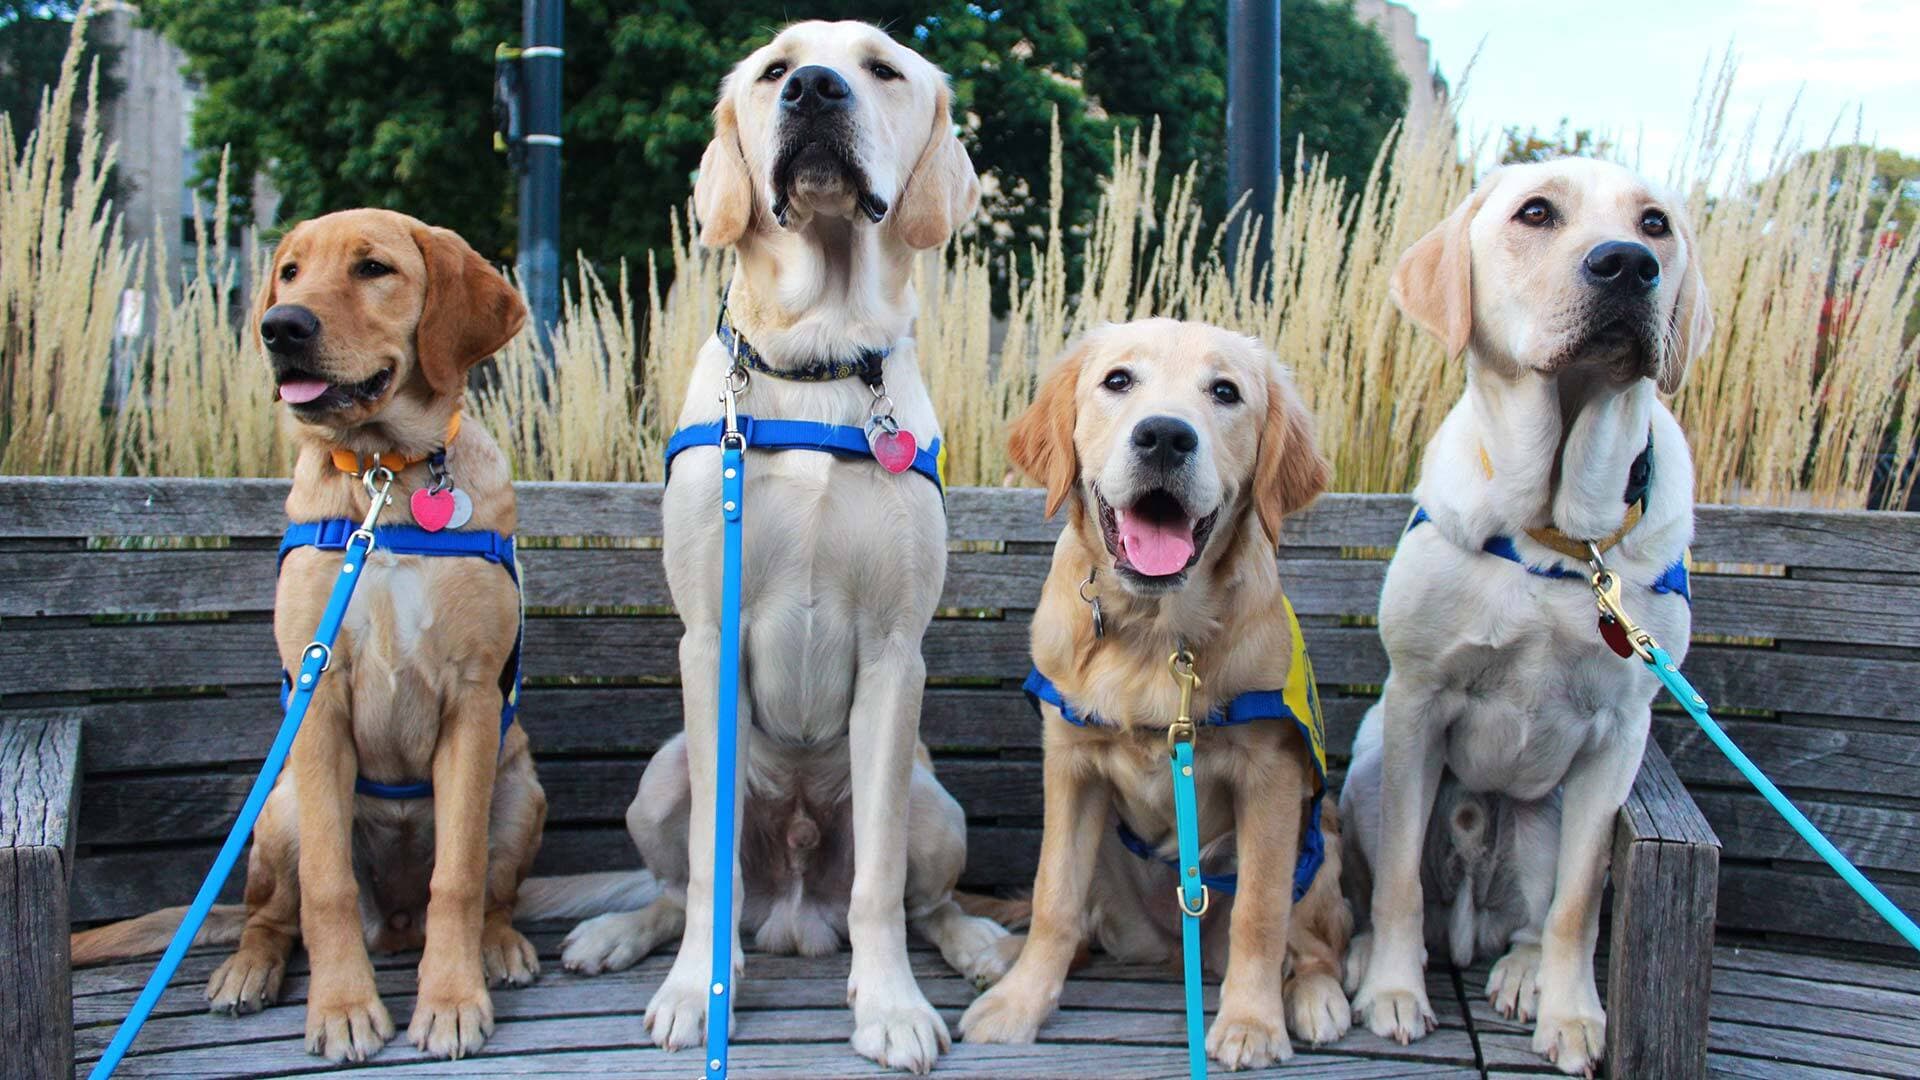 Four assistance dogs in training lined up on a bench